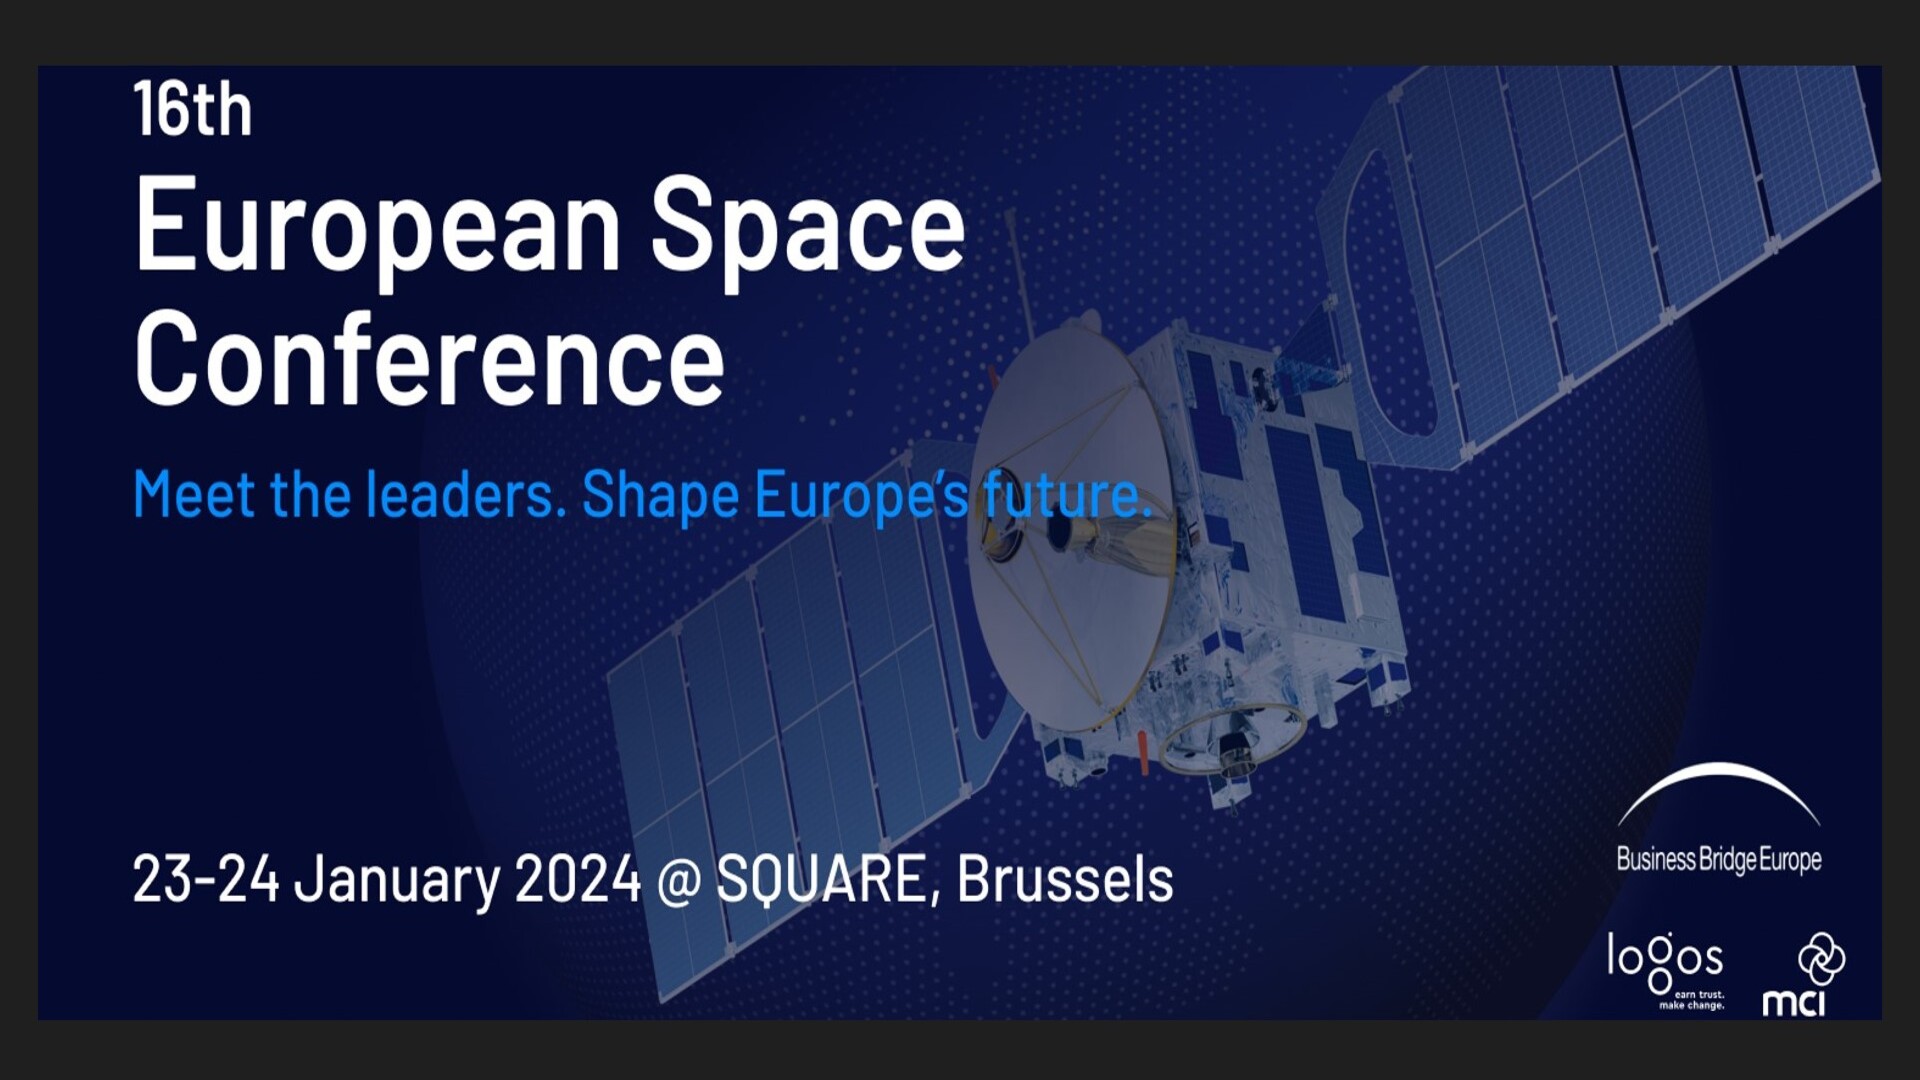 16th European Space Conference